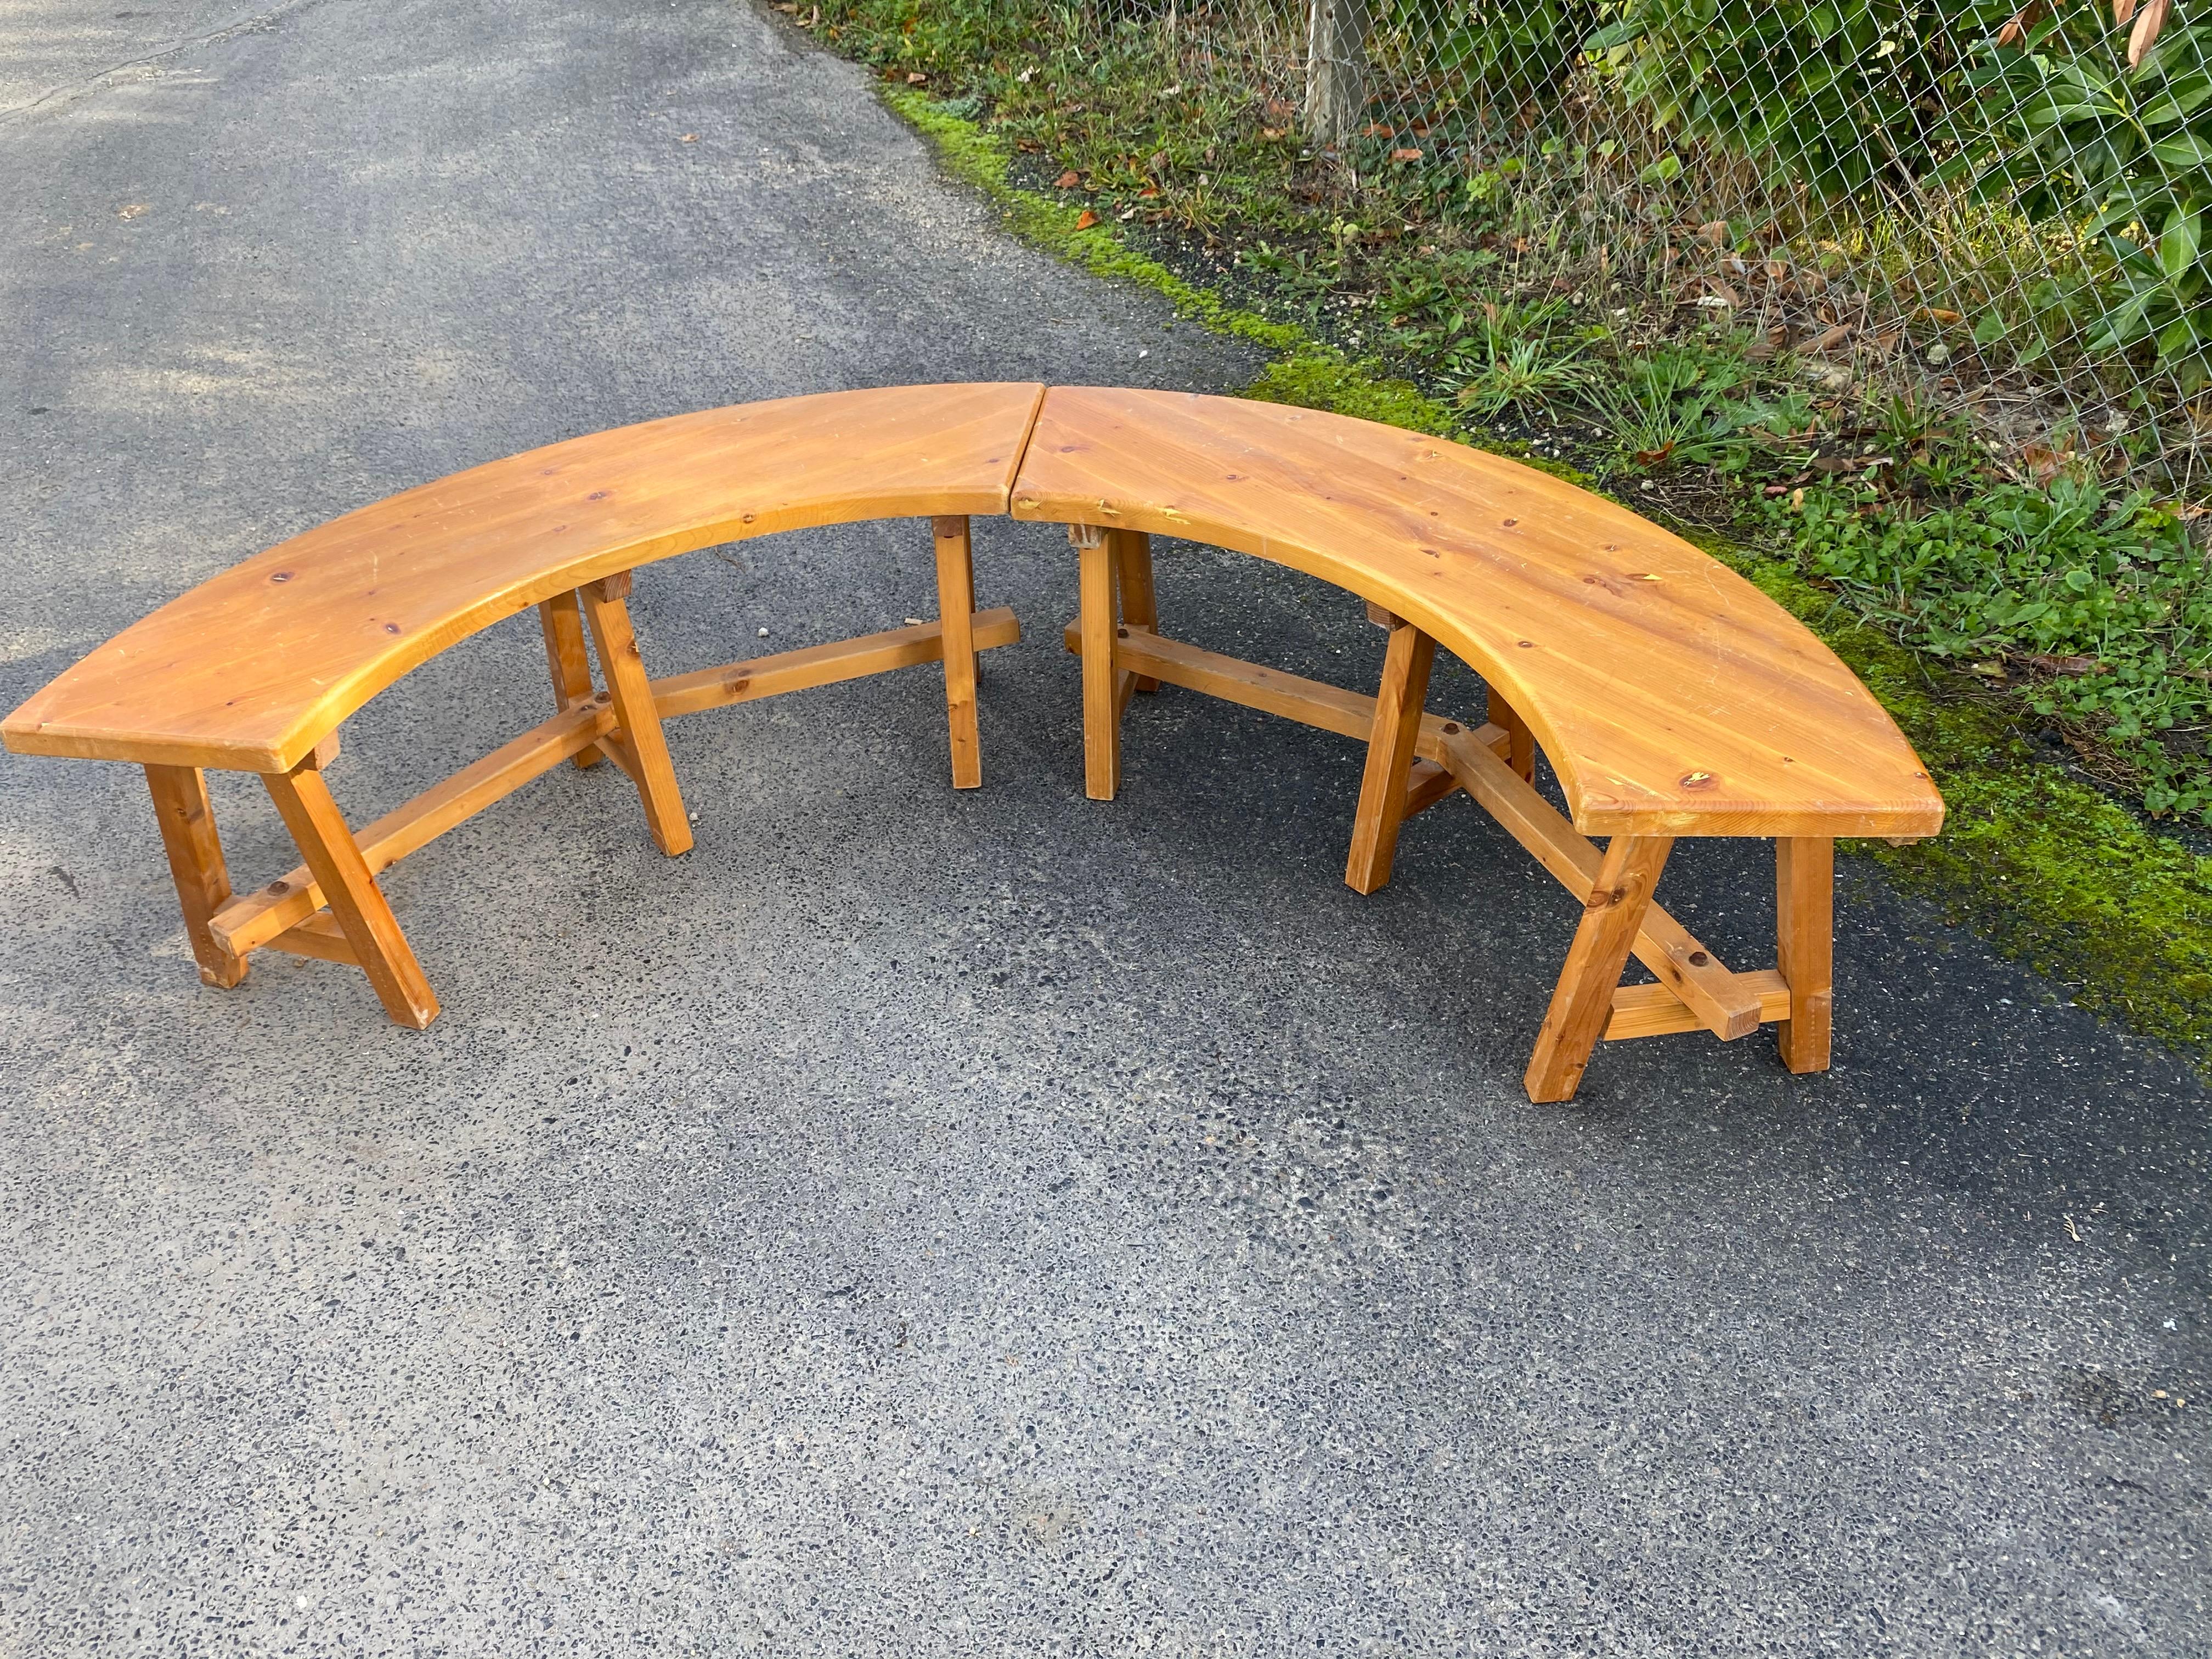 2 Pine Benches in the Style of Chapo, circa 1970 For Sale 3